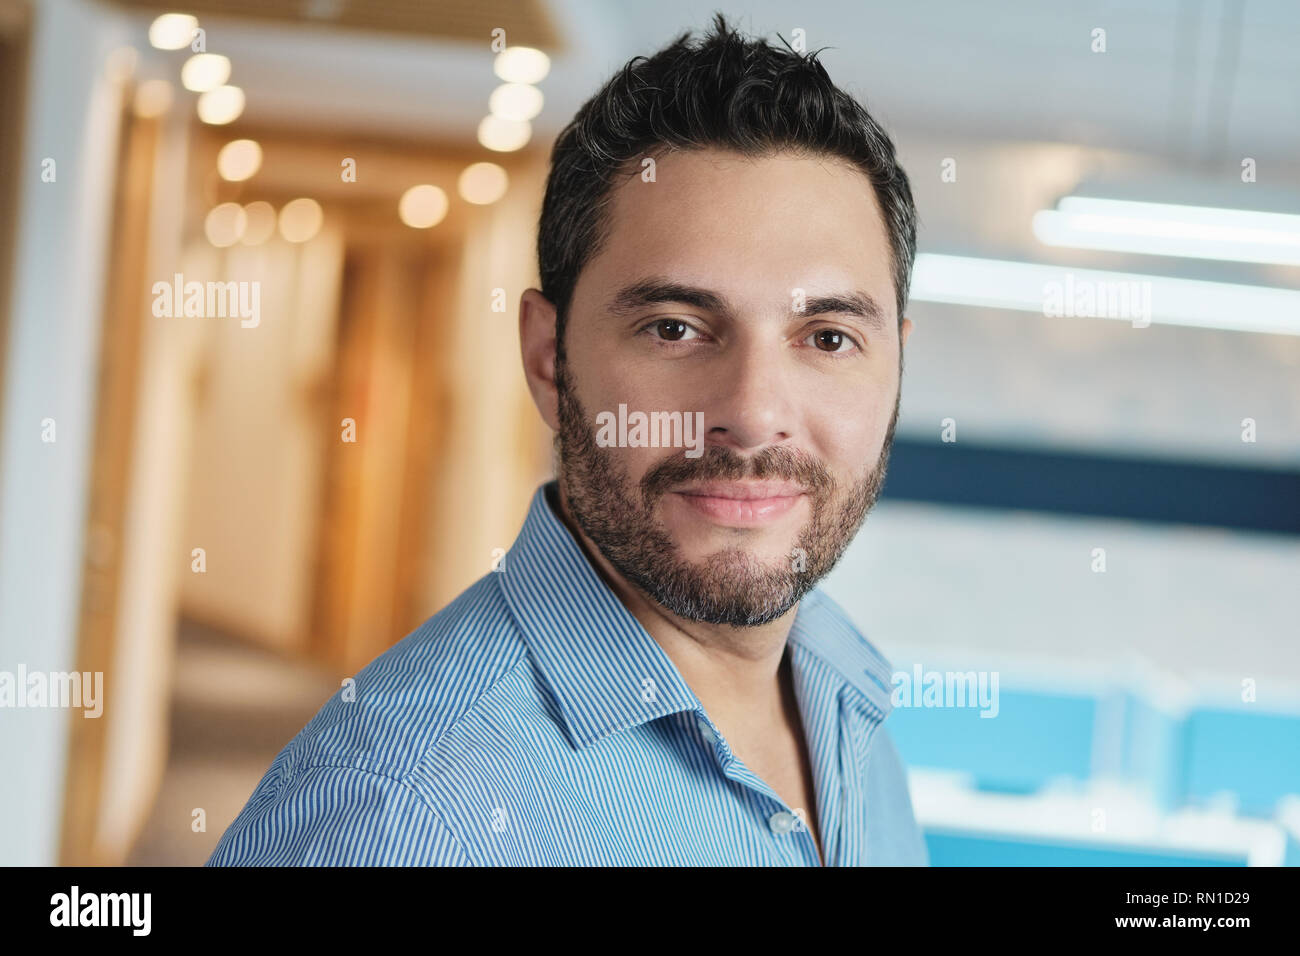 Portrait Of Happy Young Manager Business Man Smiling At Work Banque D'Images